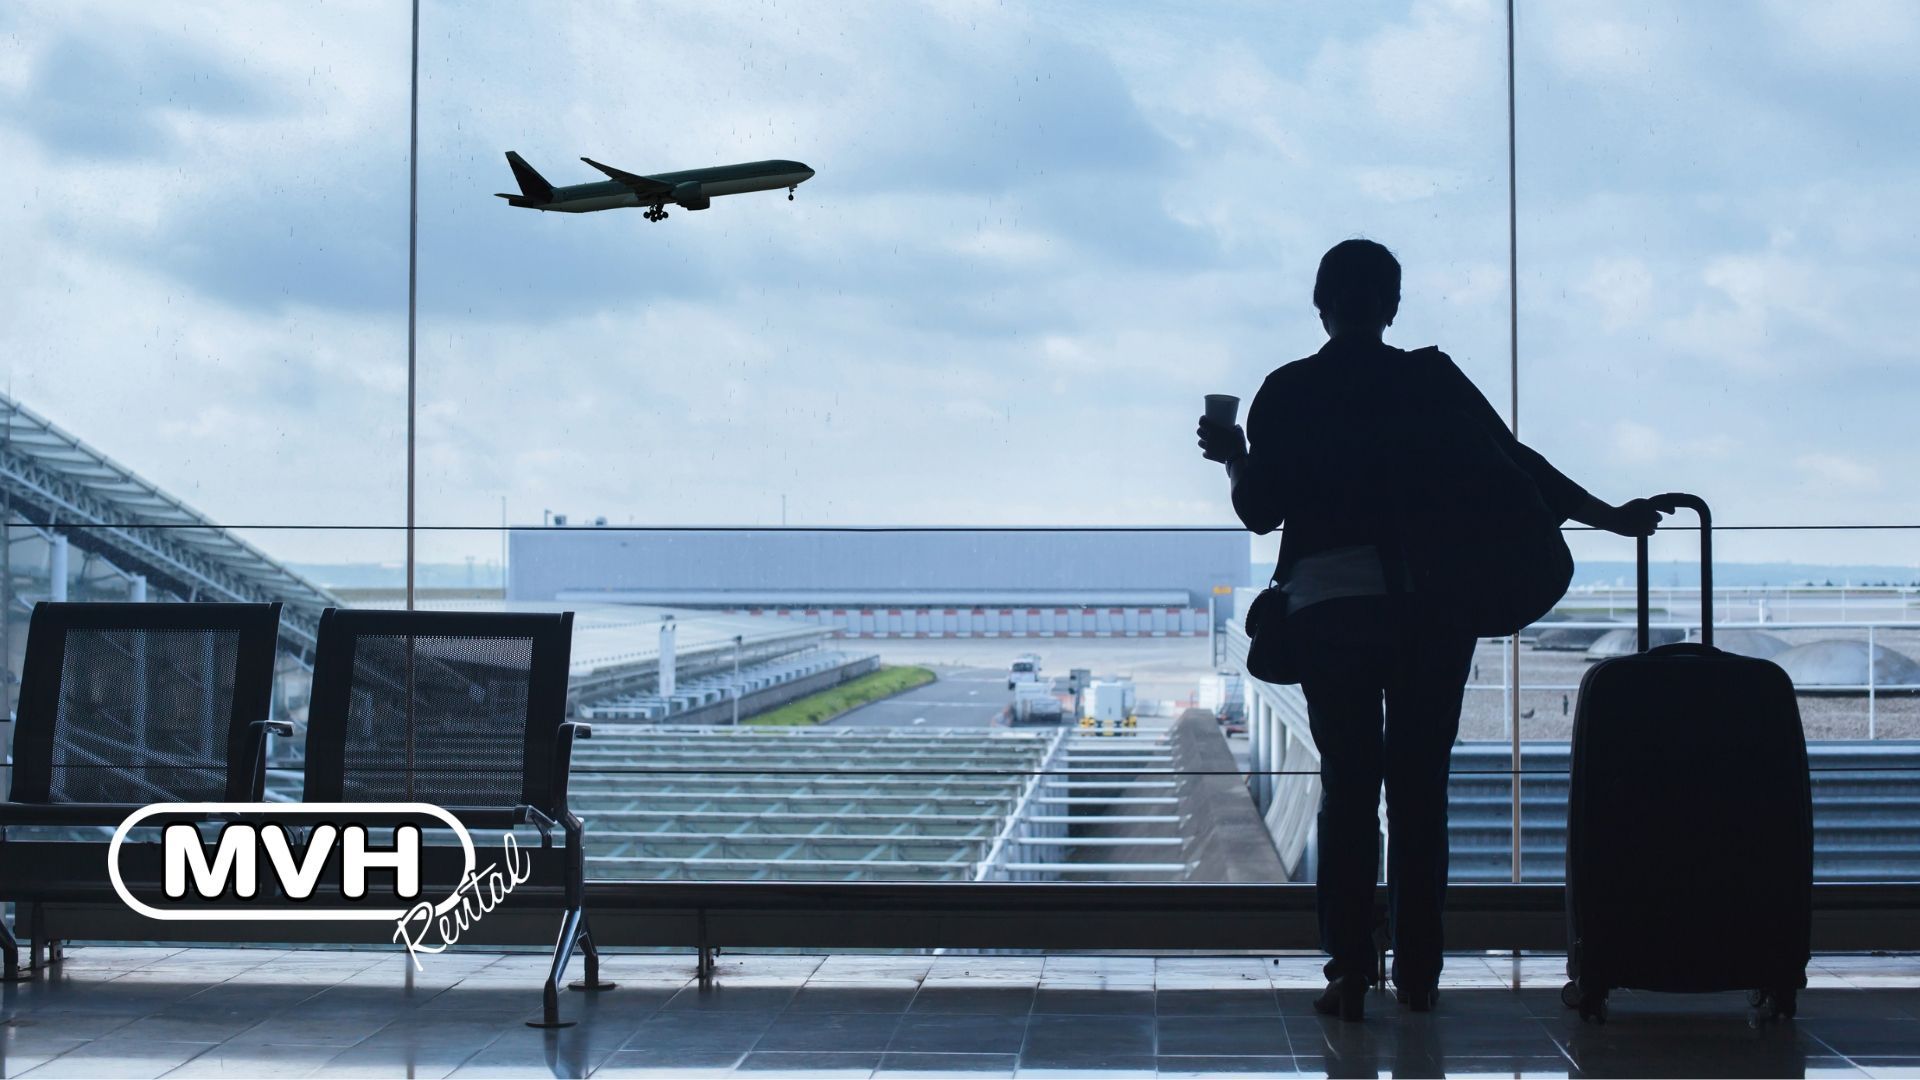 When hiring a car from an airport, how do you get the best deal with the least stress? Find out 